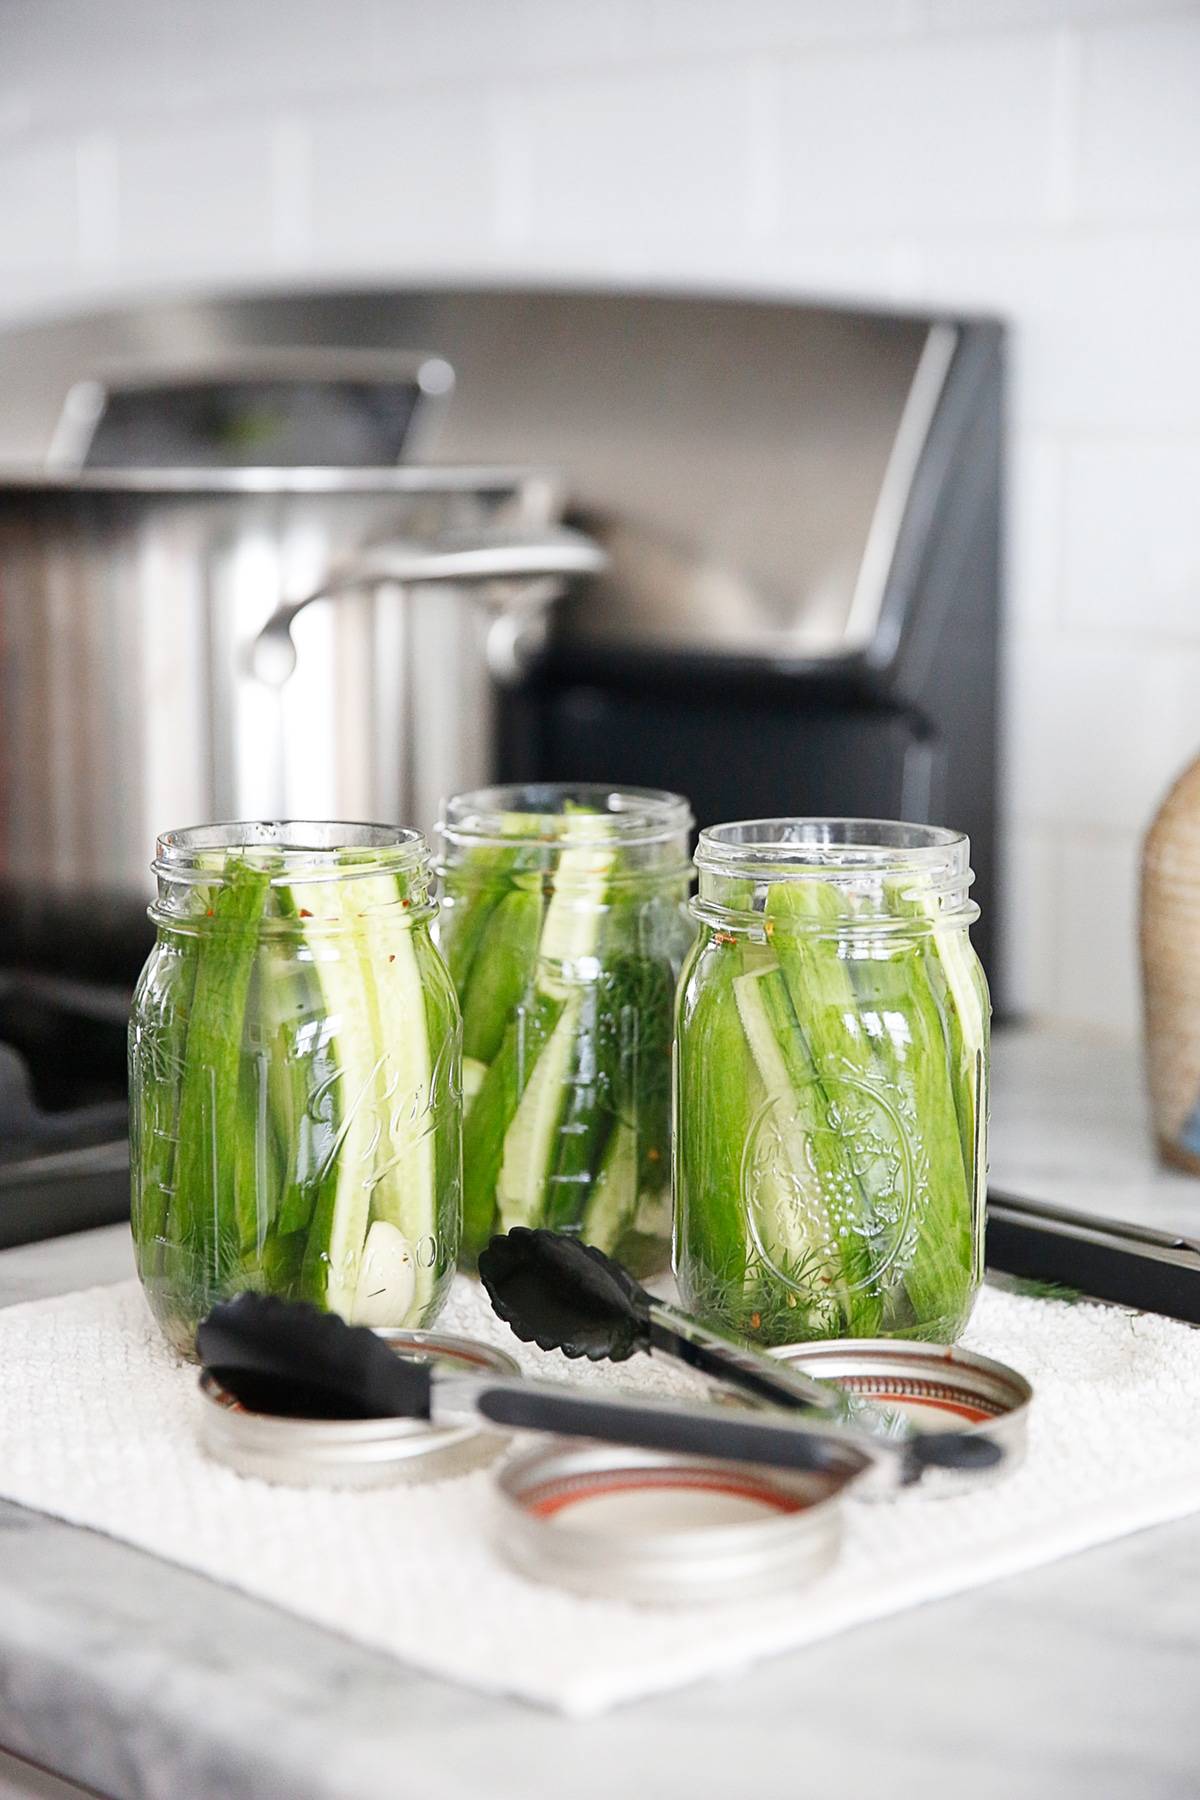 Canning Cucumbers to Make Dill Pickles